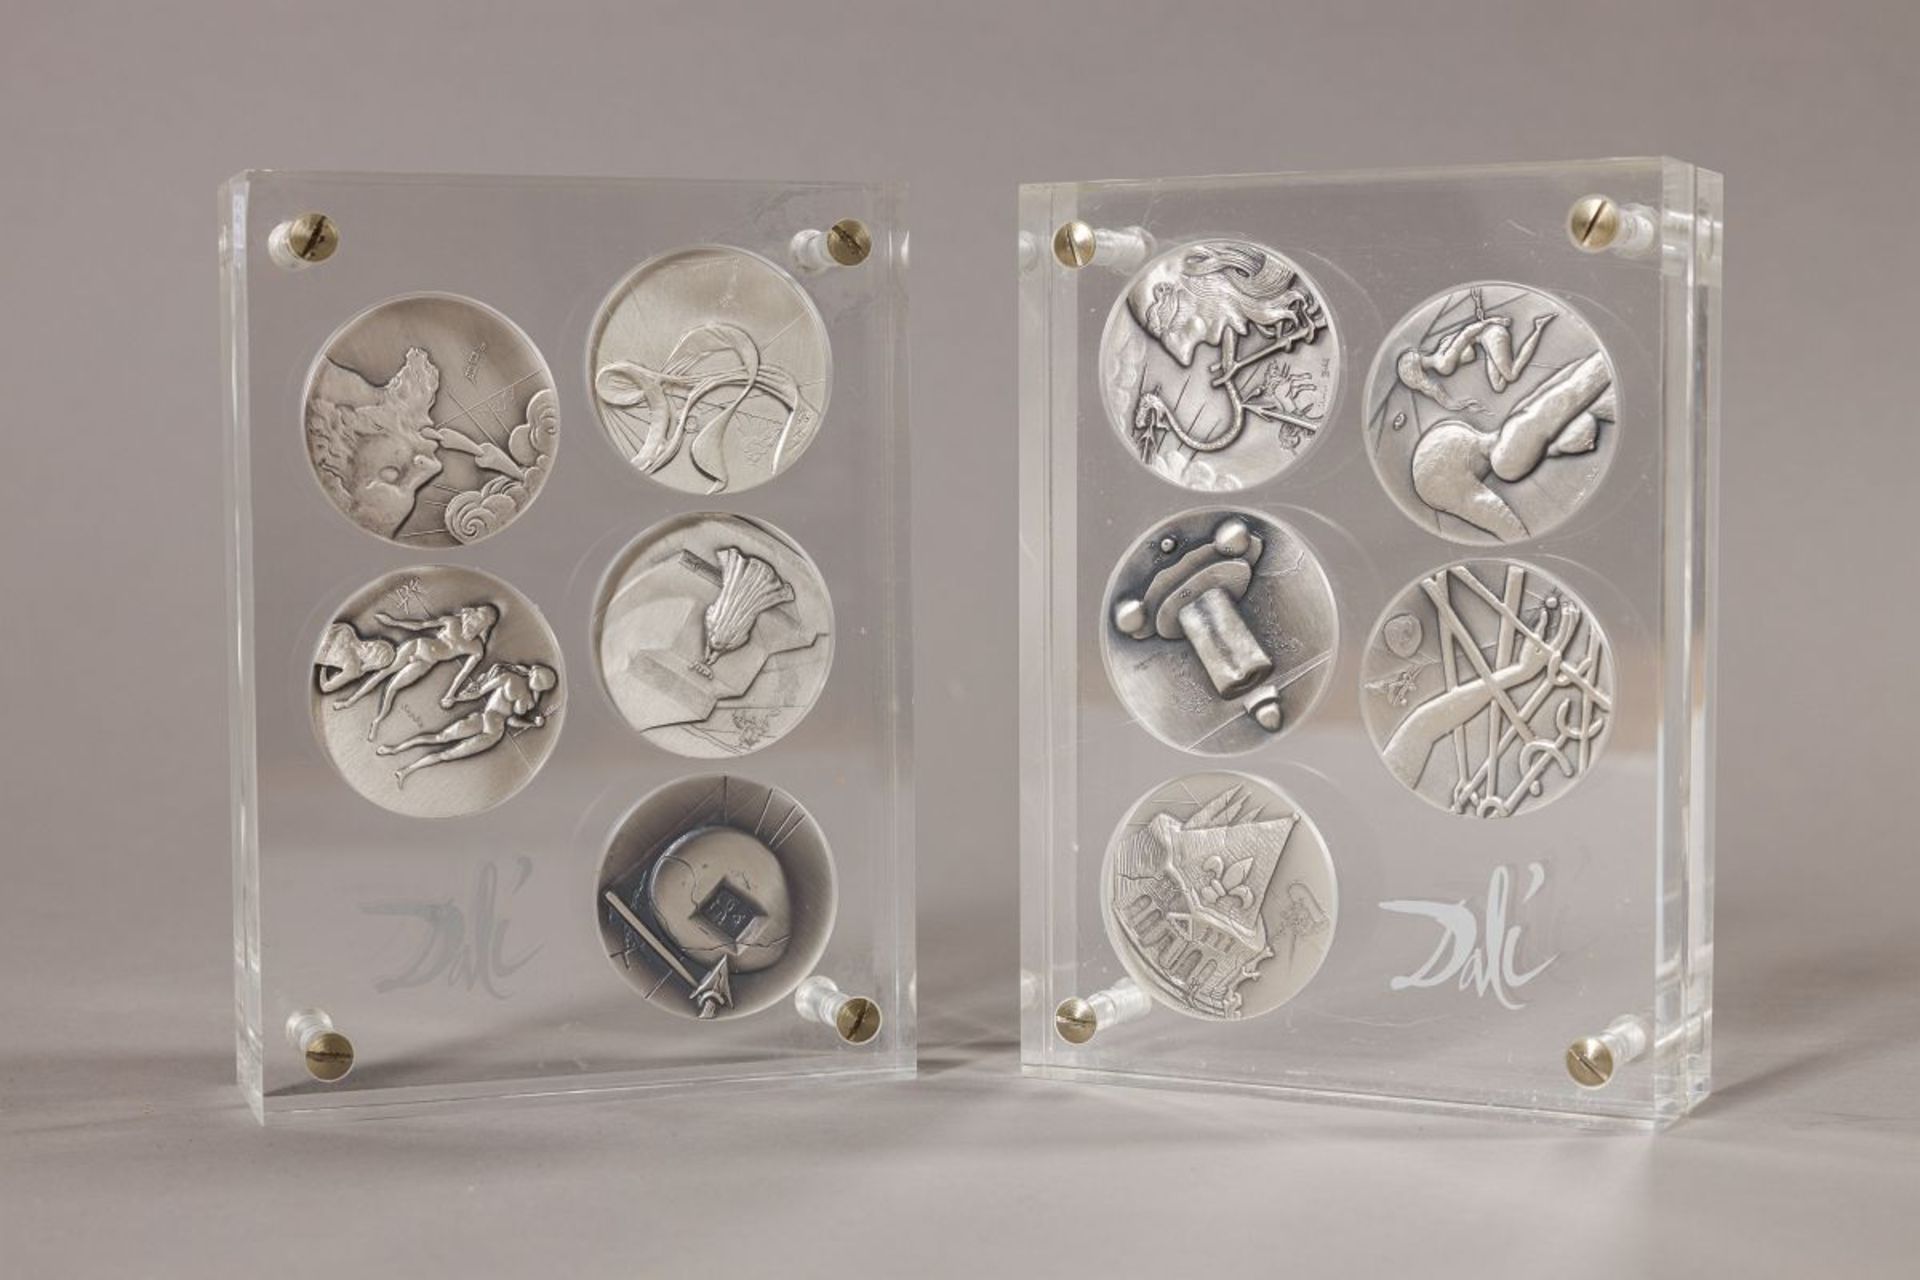 Dalí, Salvador(1904 - 1989)Ten Commandments, 1975each 5 silvermedals in acrylic glasseach - Image 3 of 14